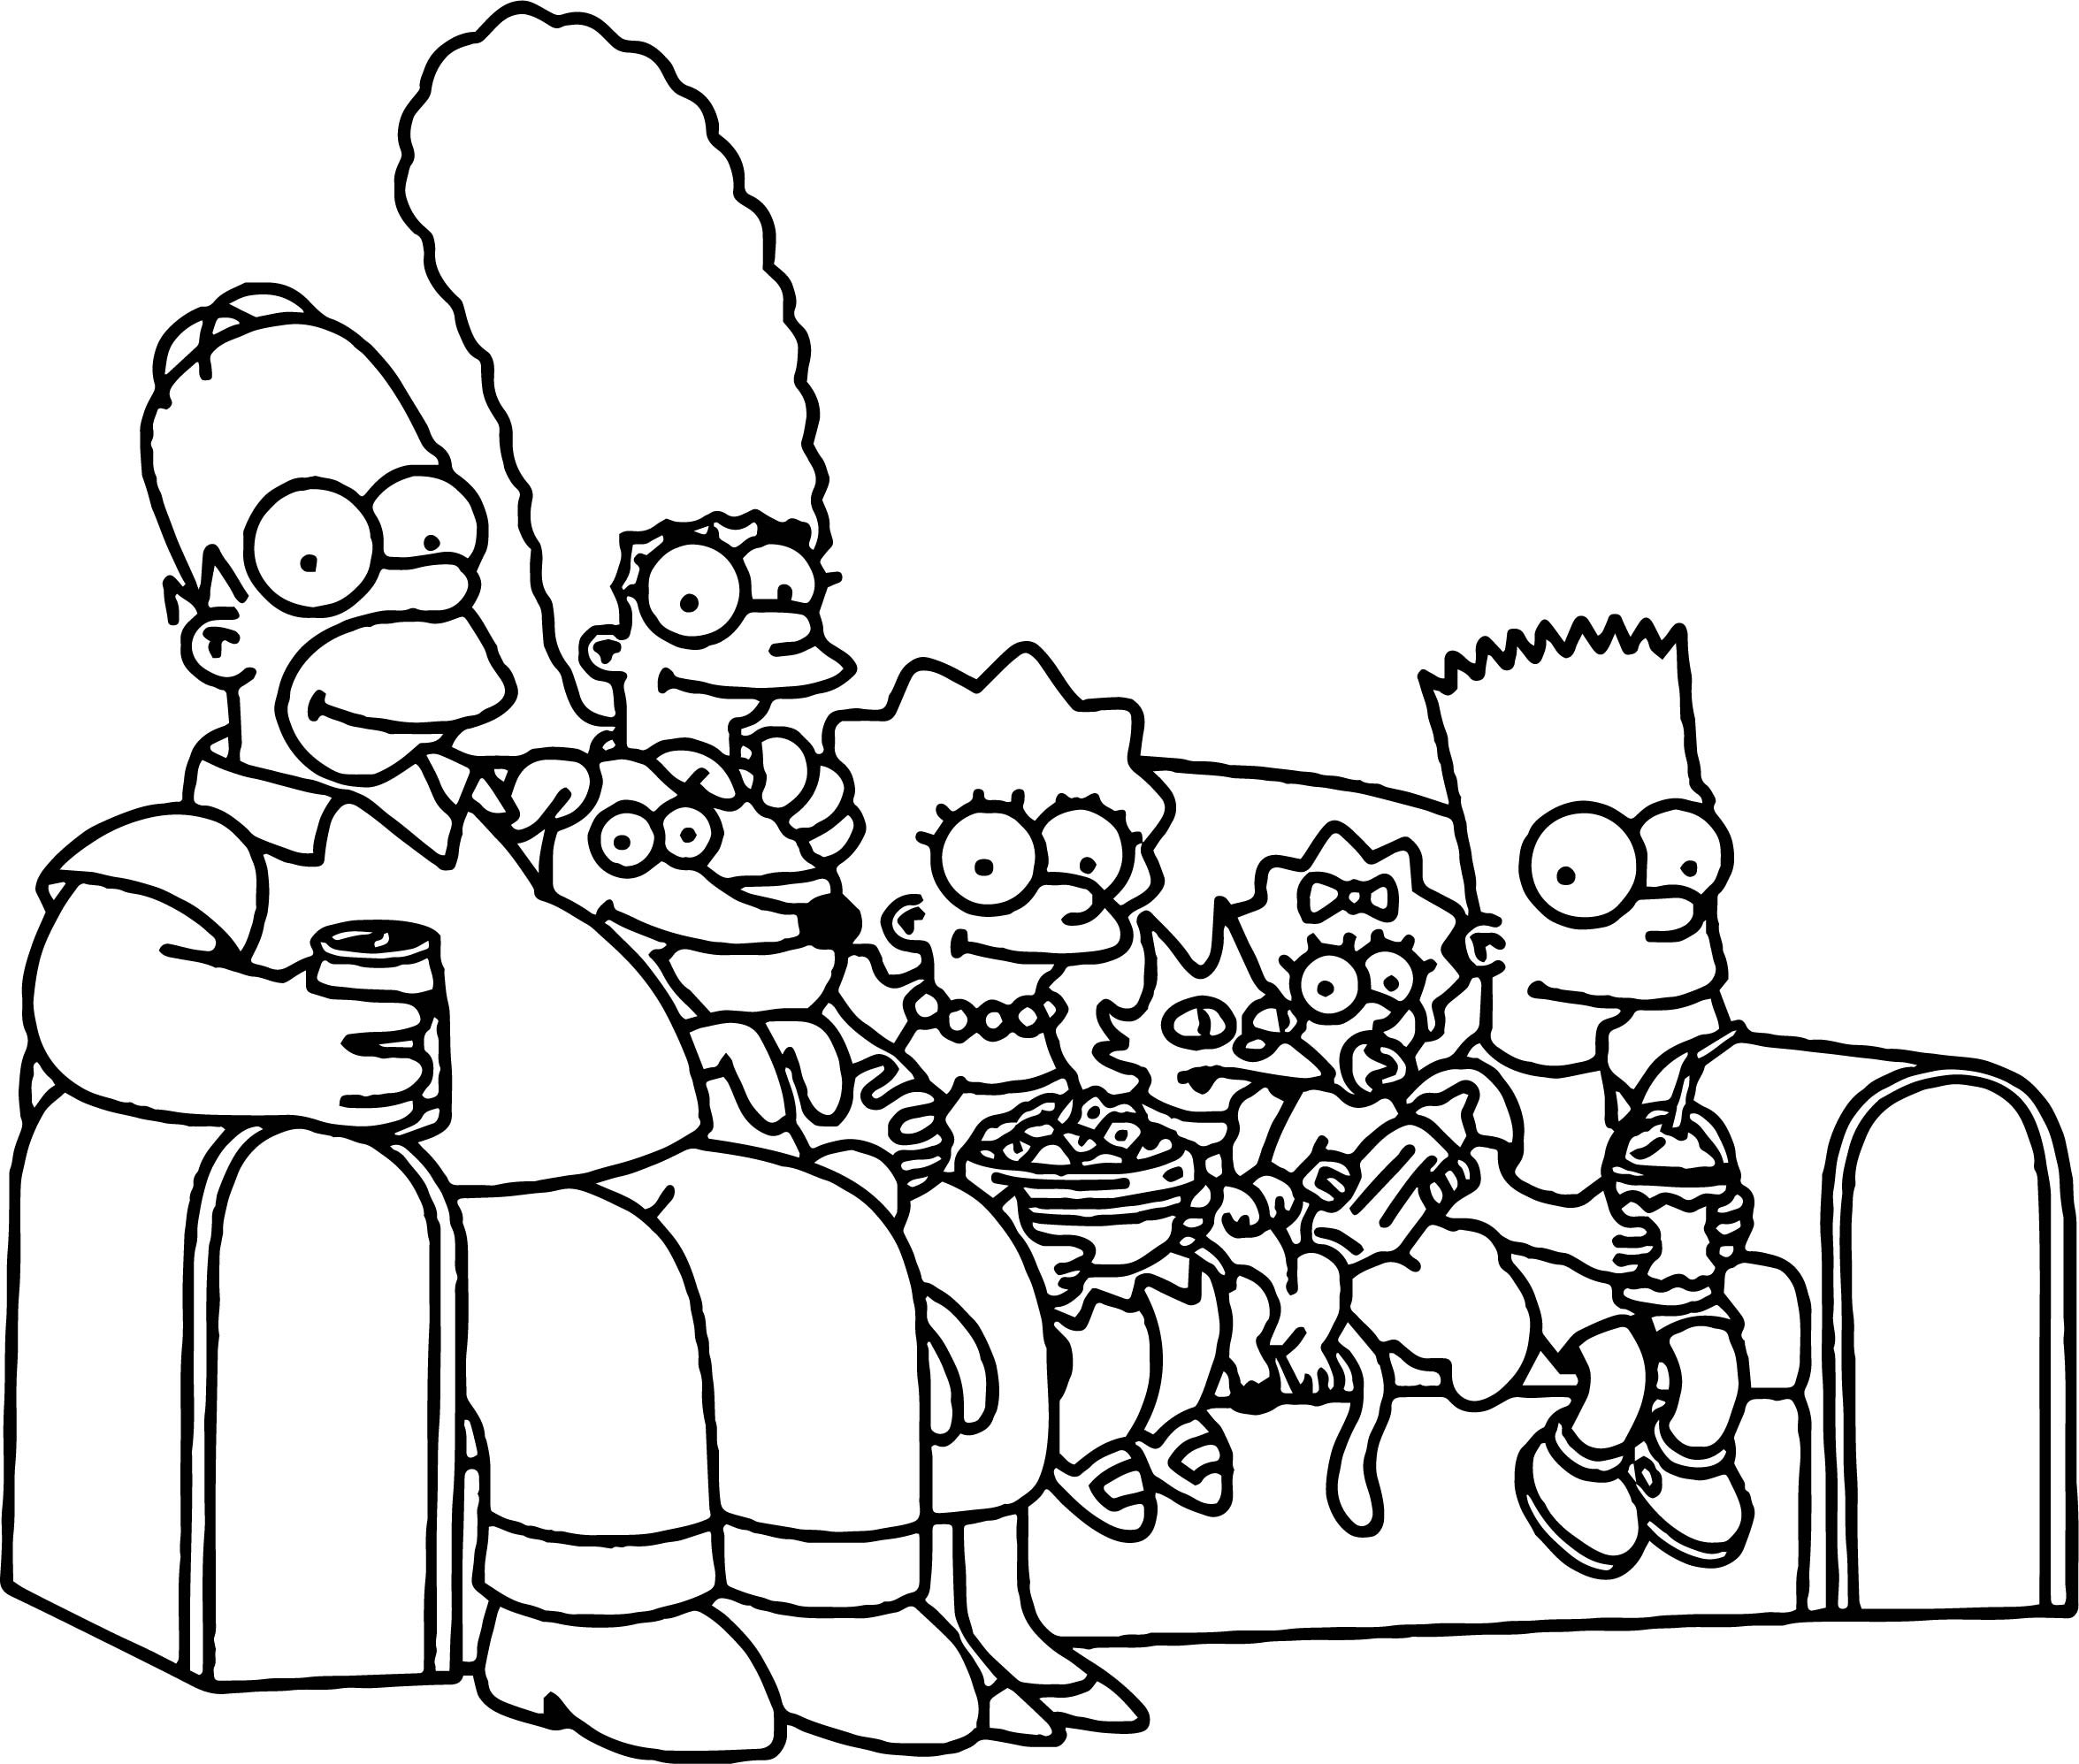 Simpsons Coloring Pages At Getdrawings Free Download